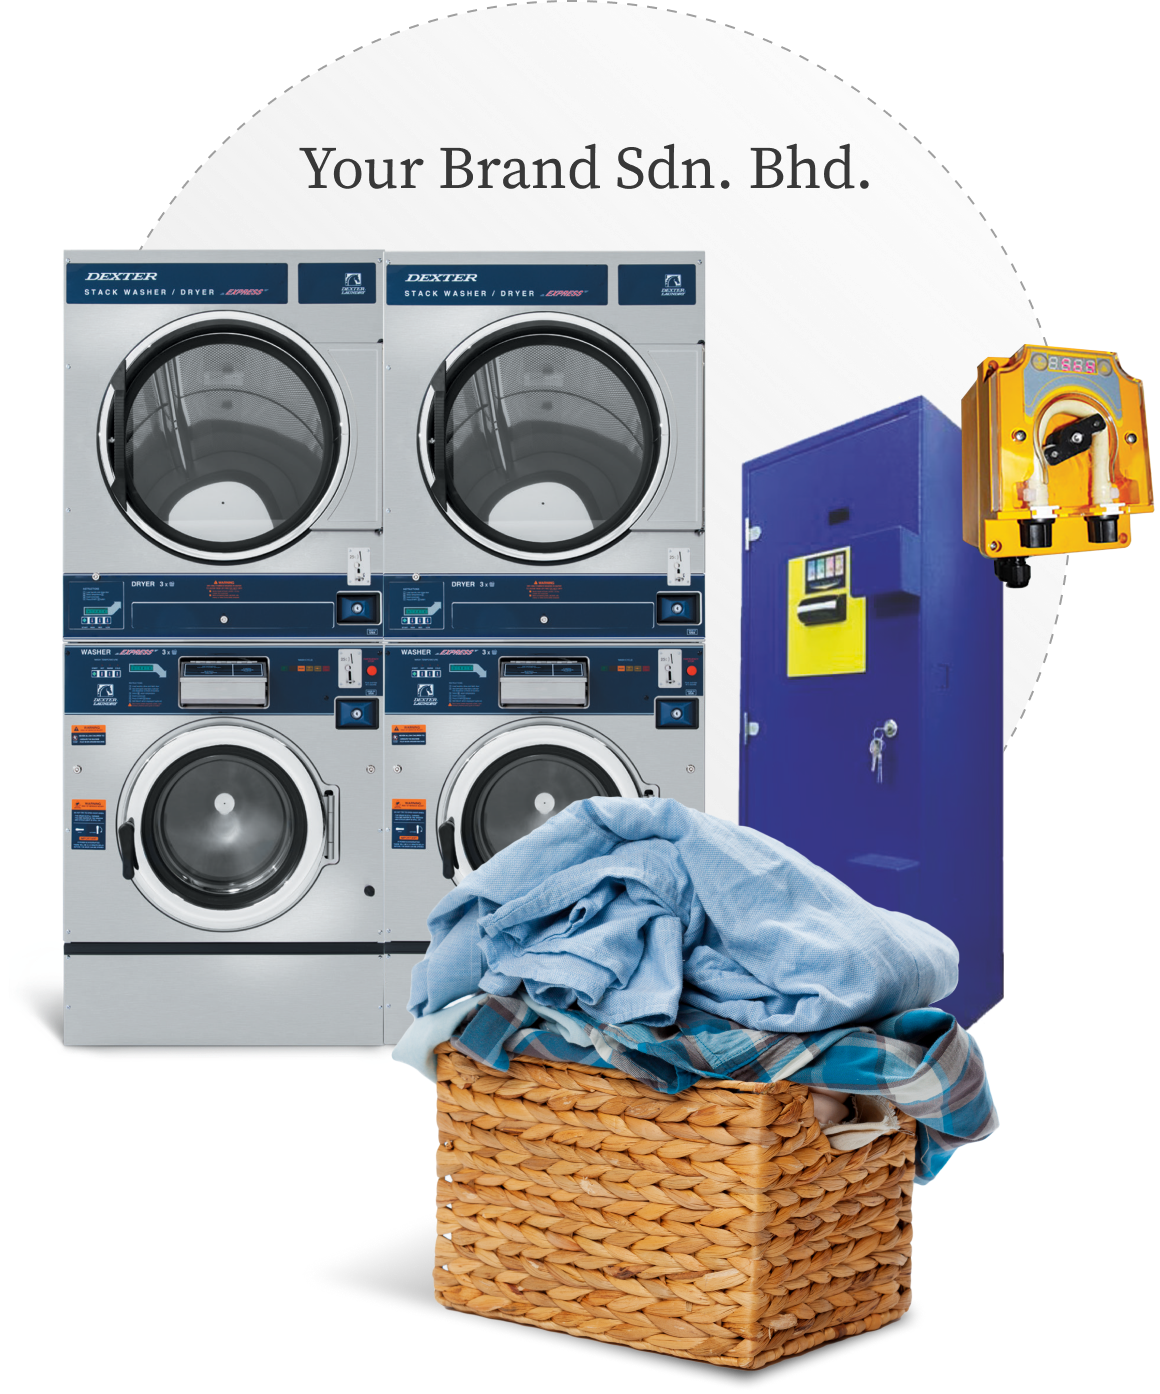 Start your own laundry brand with Cleanpro laundry machines and equipments